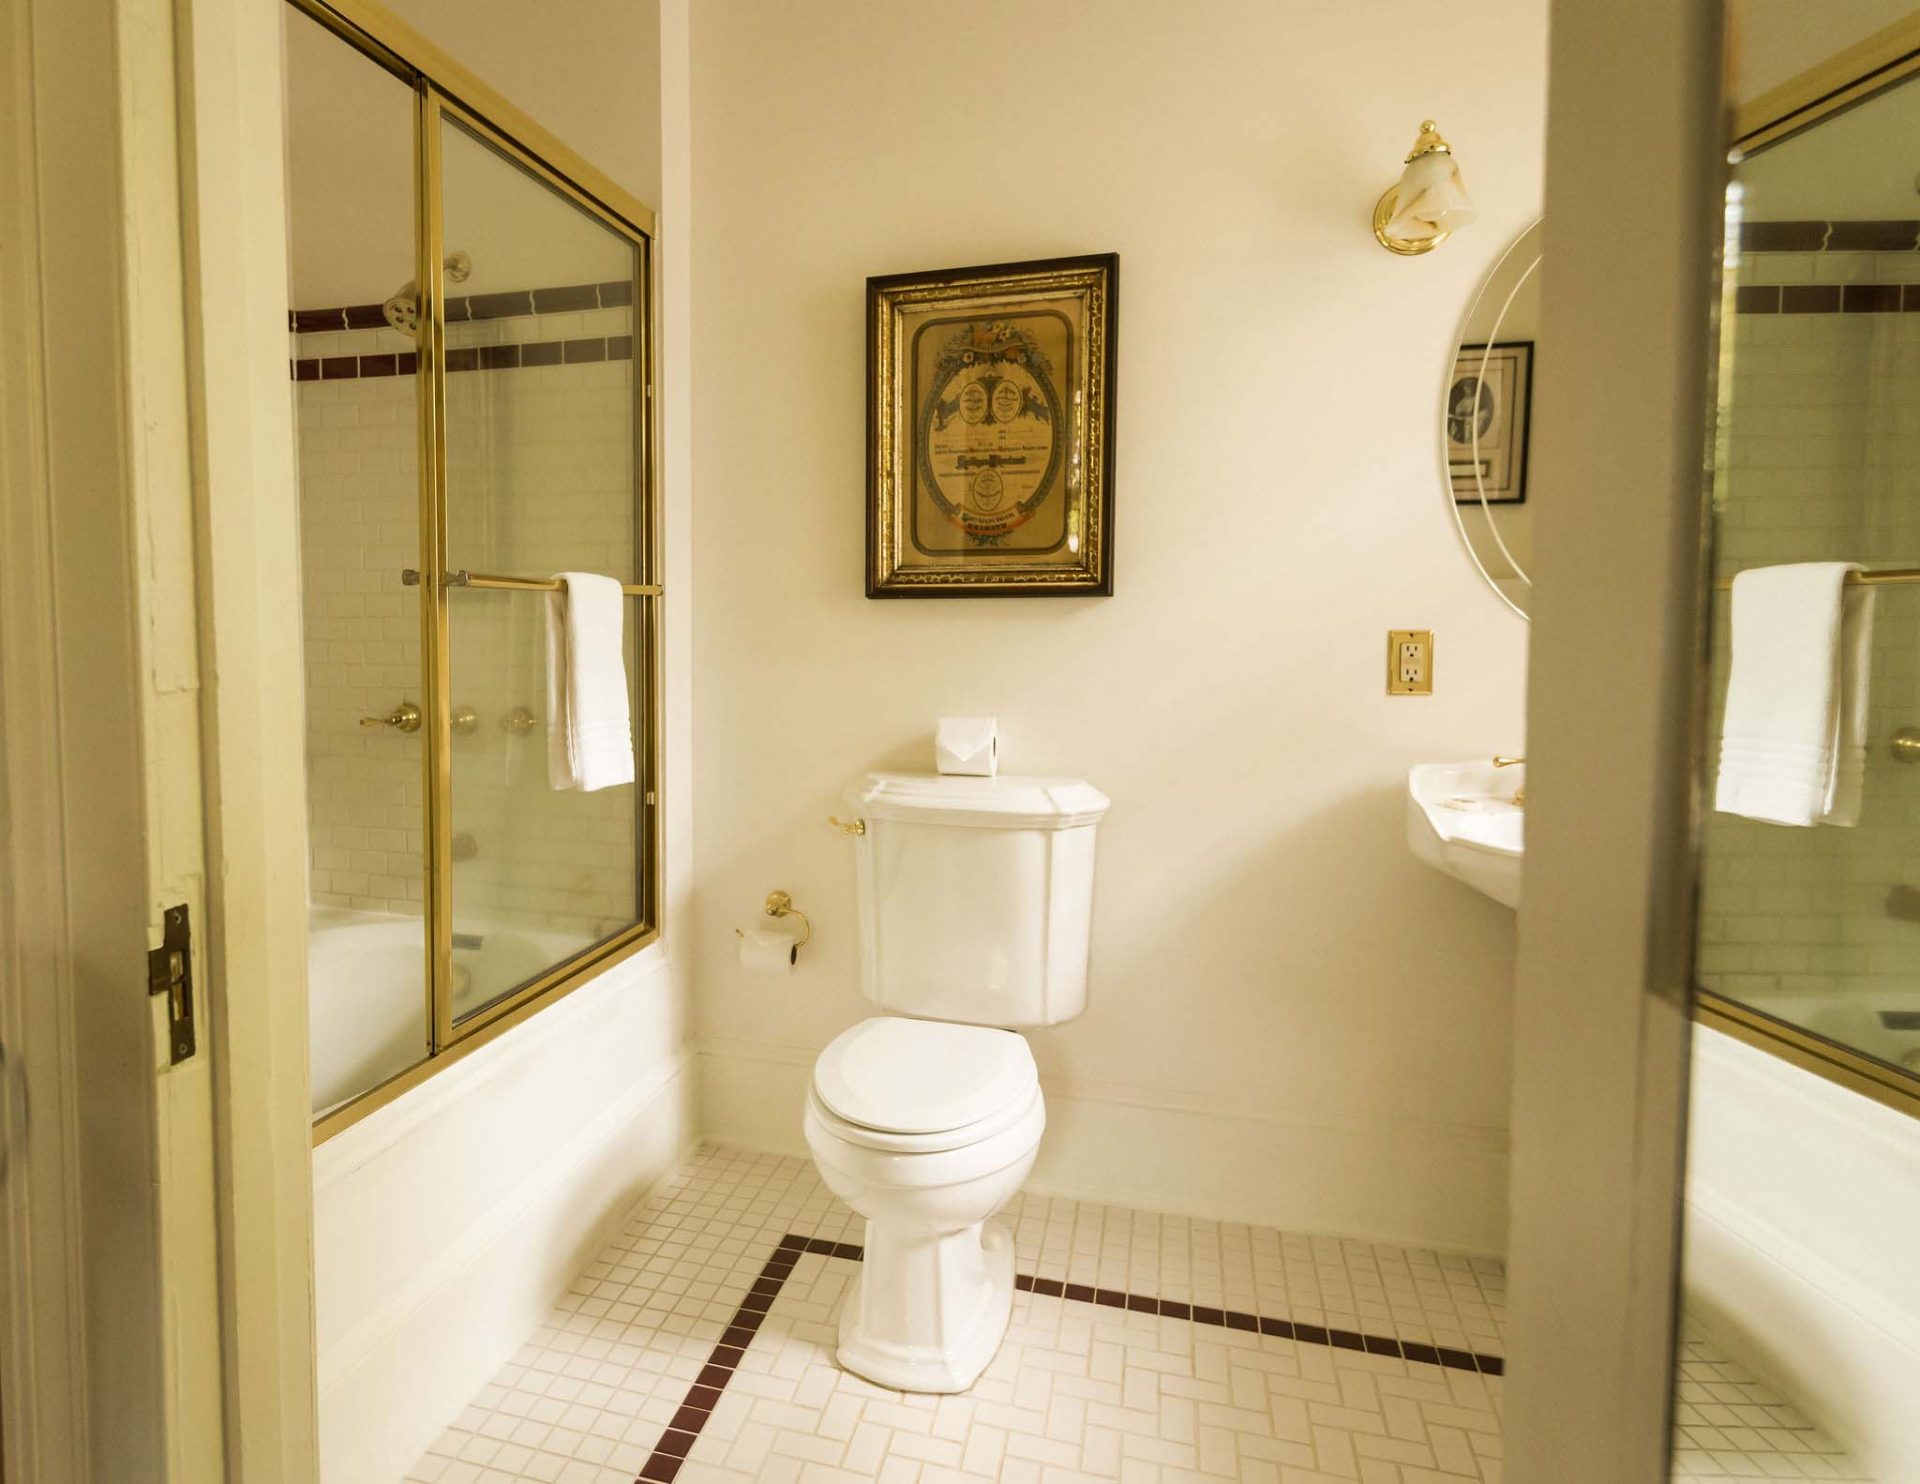 A beige-gold bathroom with a glass-door bathtub; a toilet, and a sink with an oval mirror. A gold painting hanging on the wall.